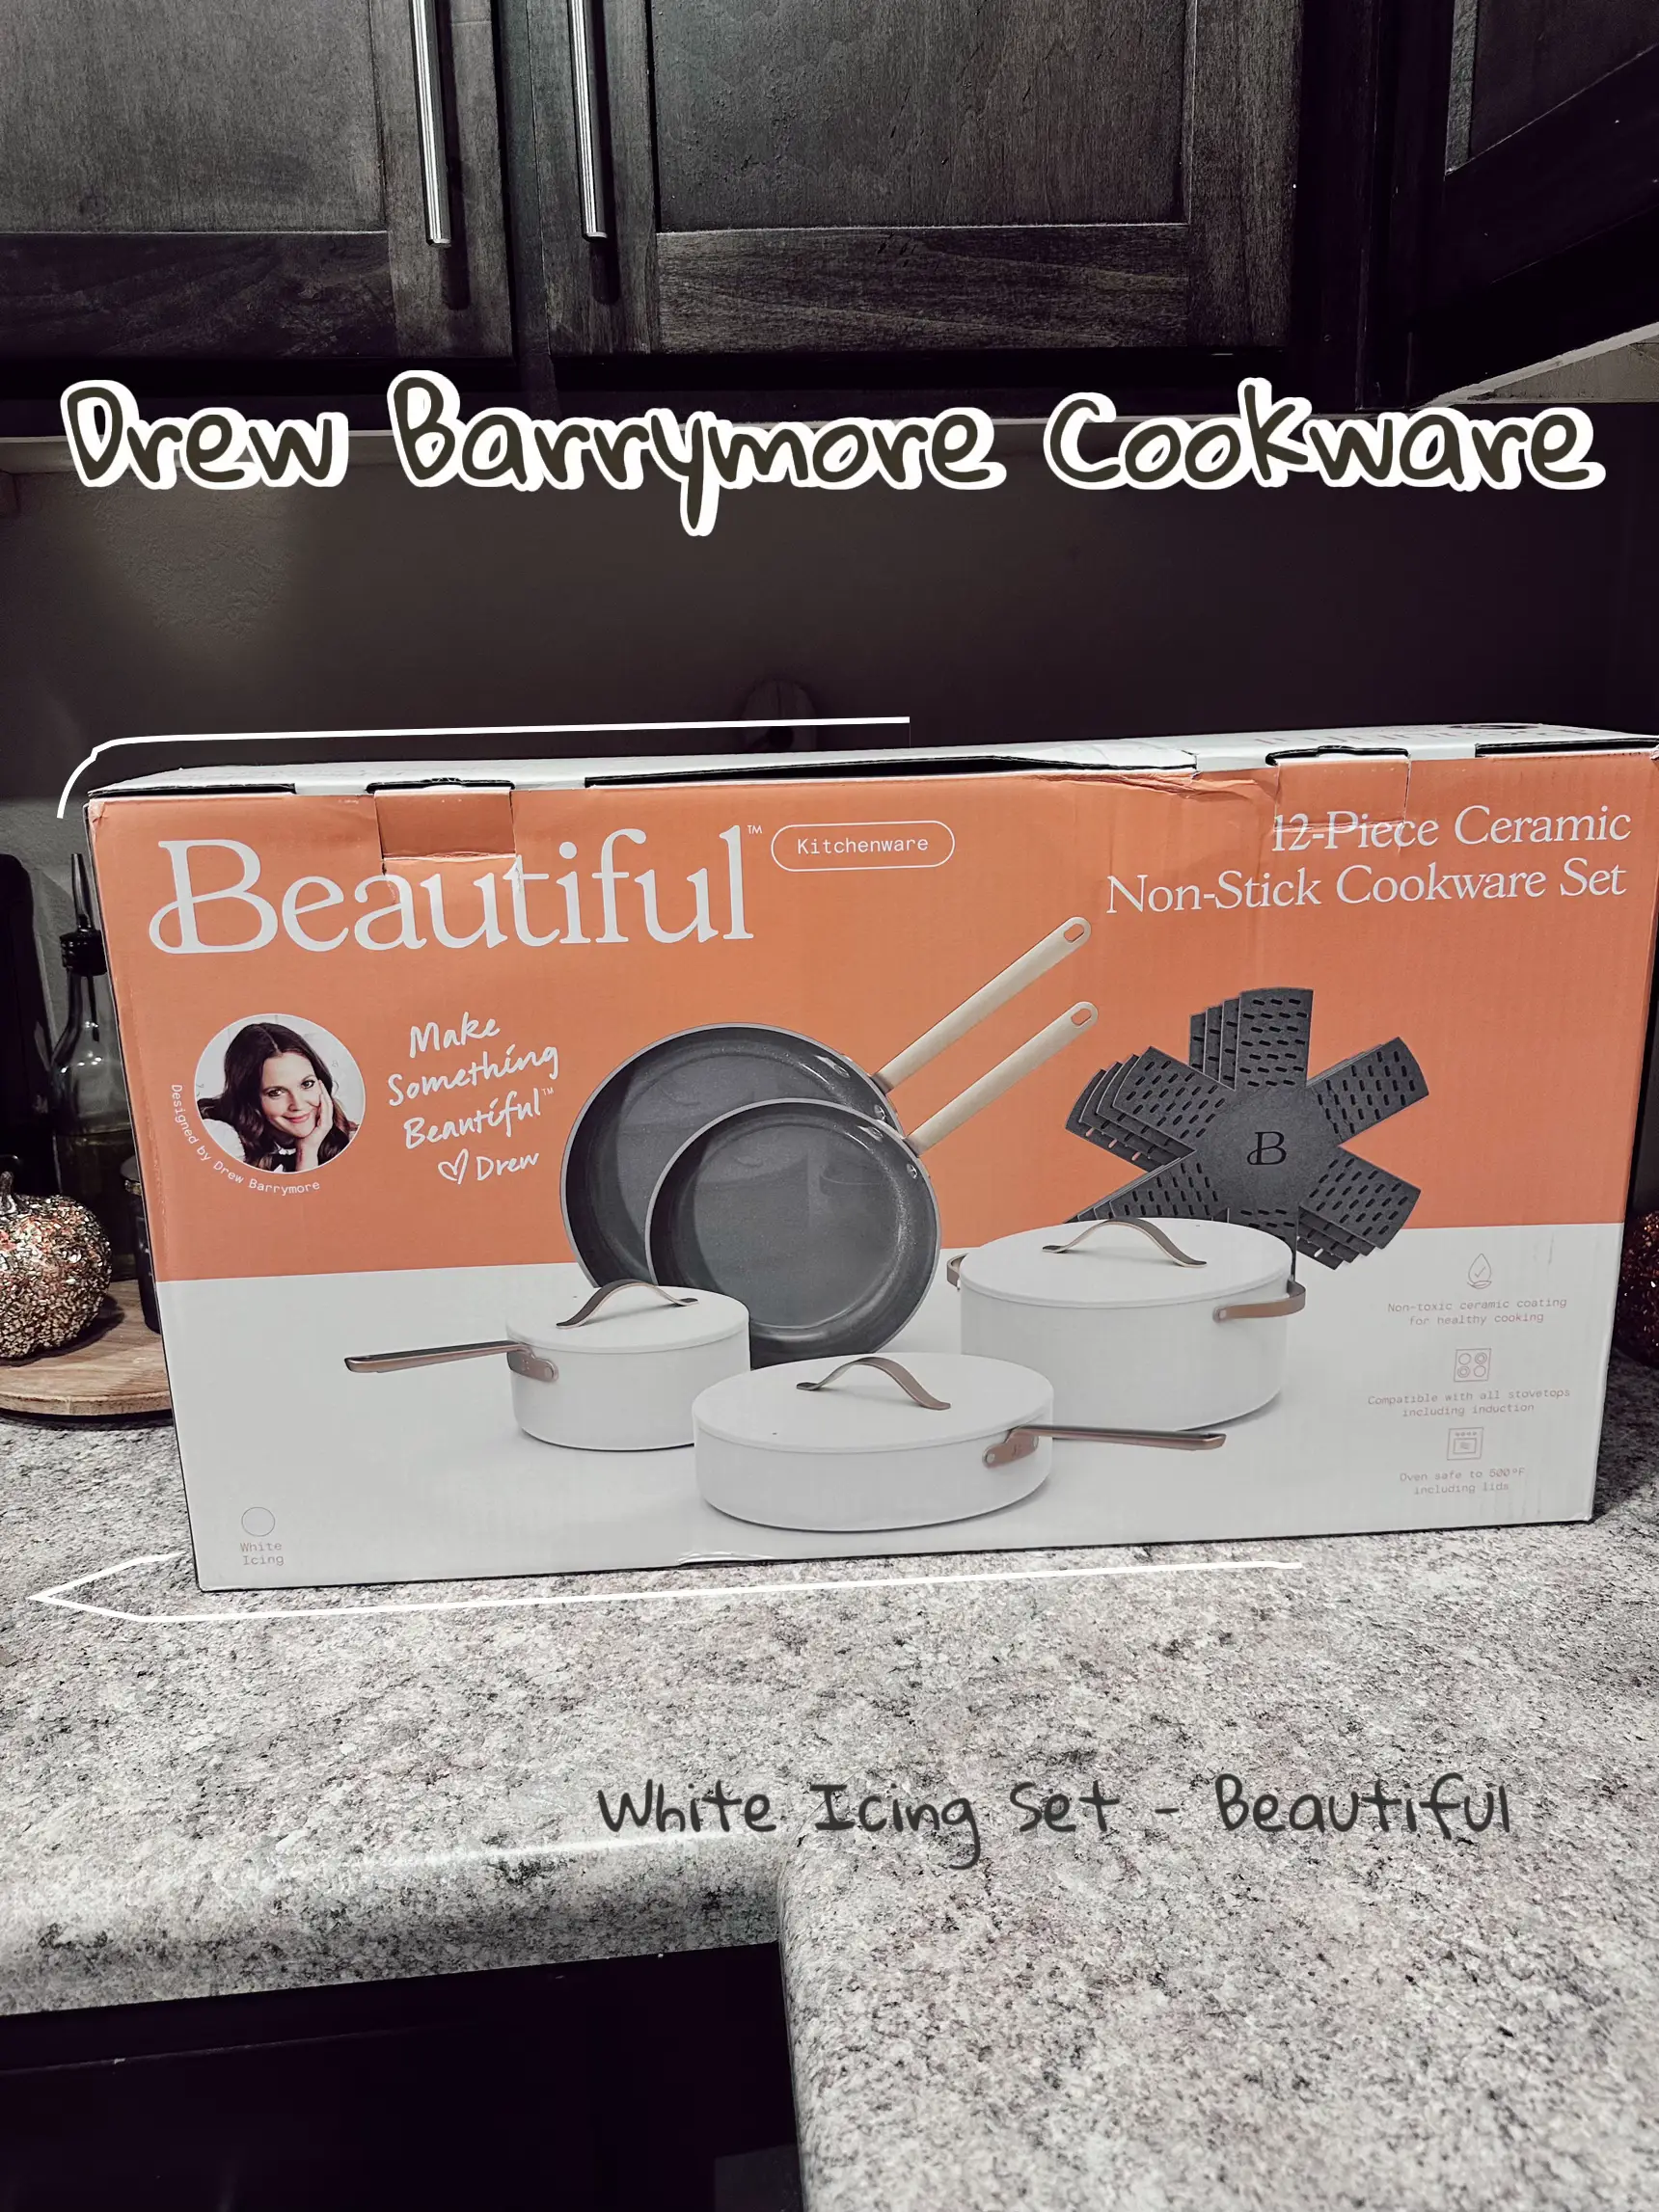 Beautiful by Drew Barrymore Cookware Review